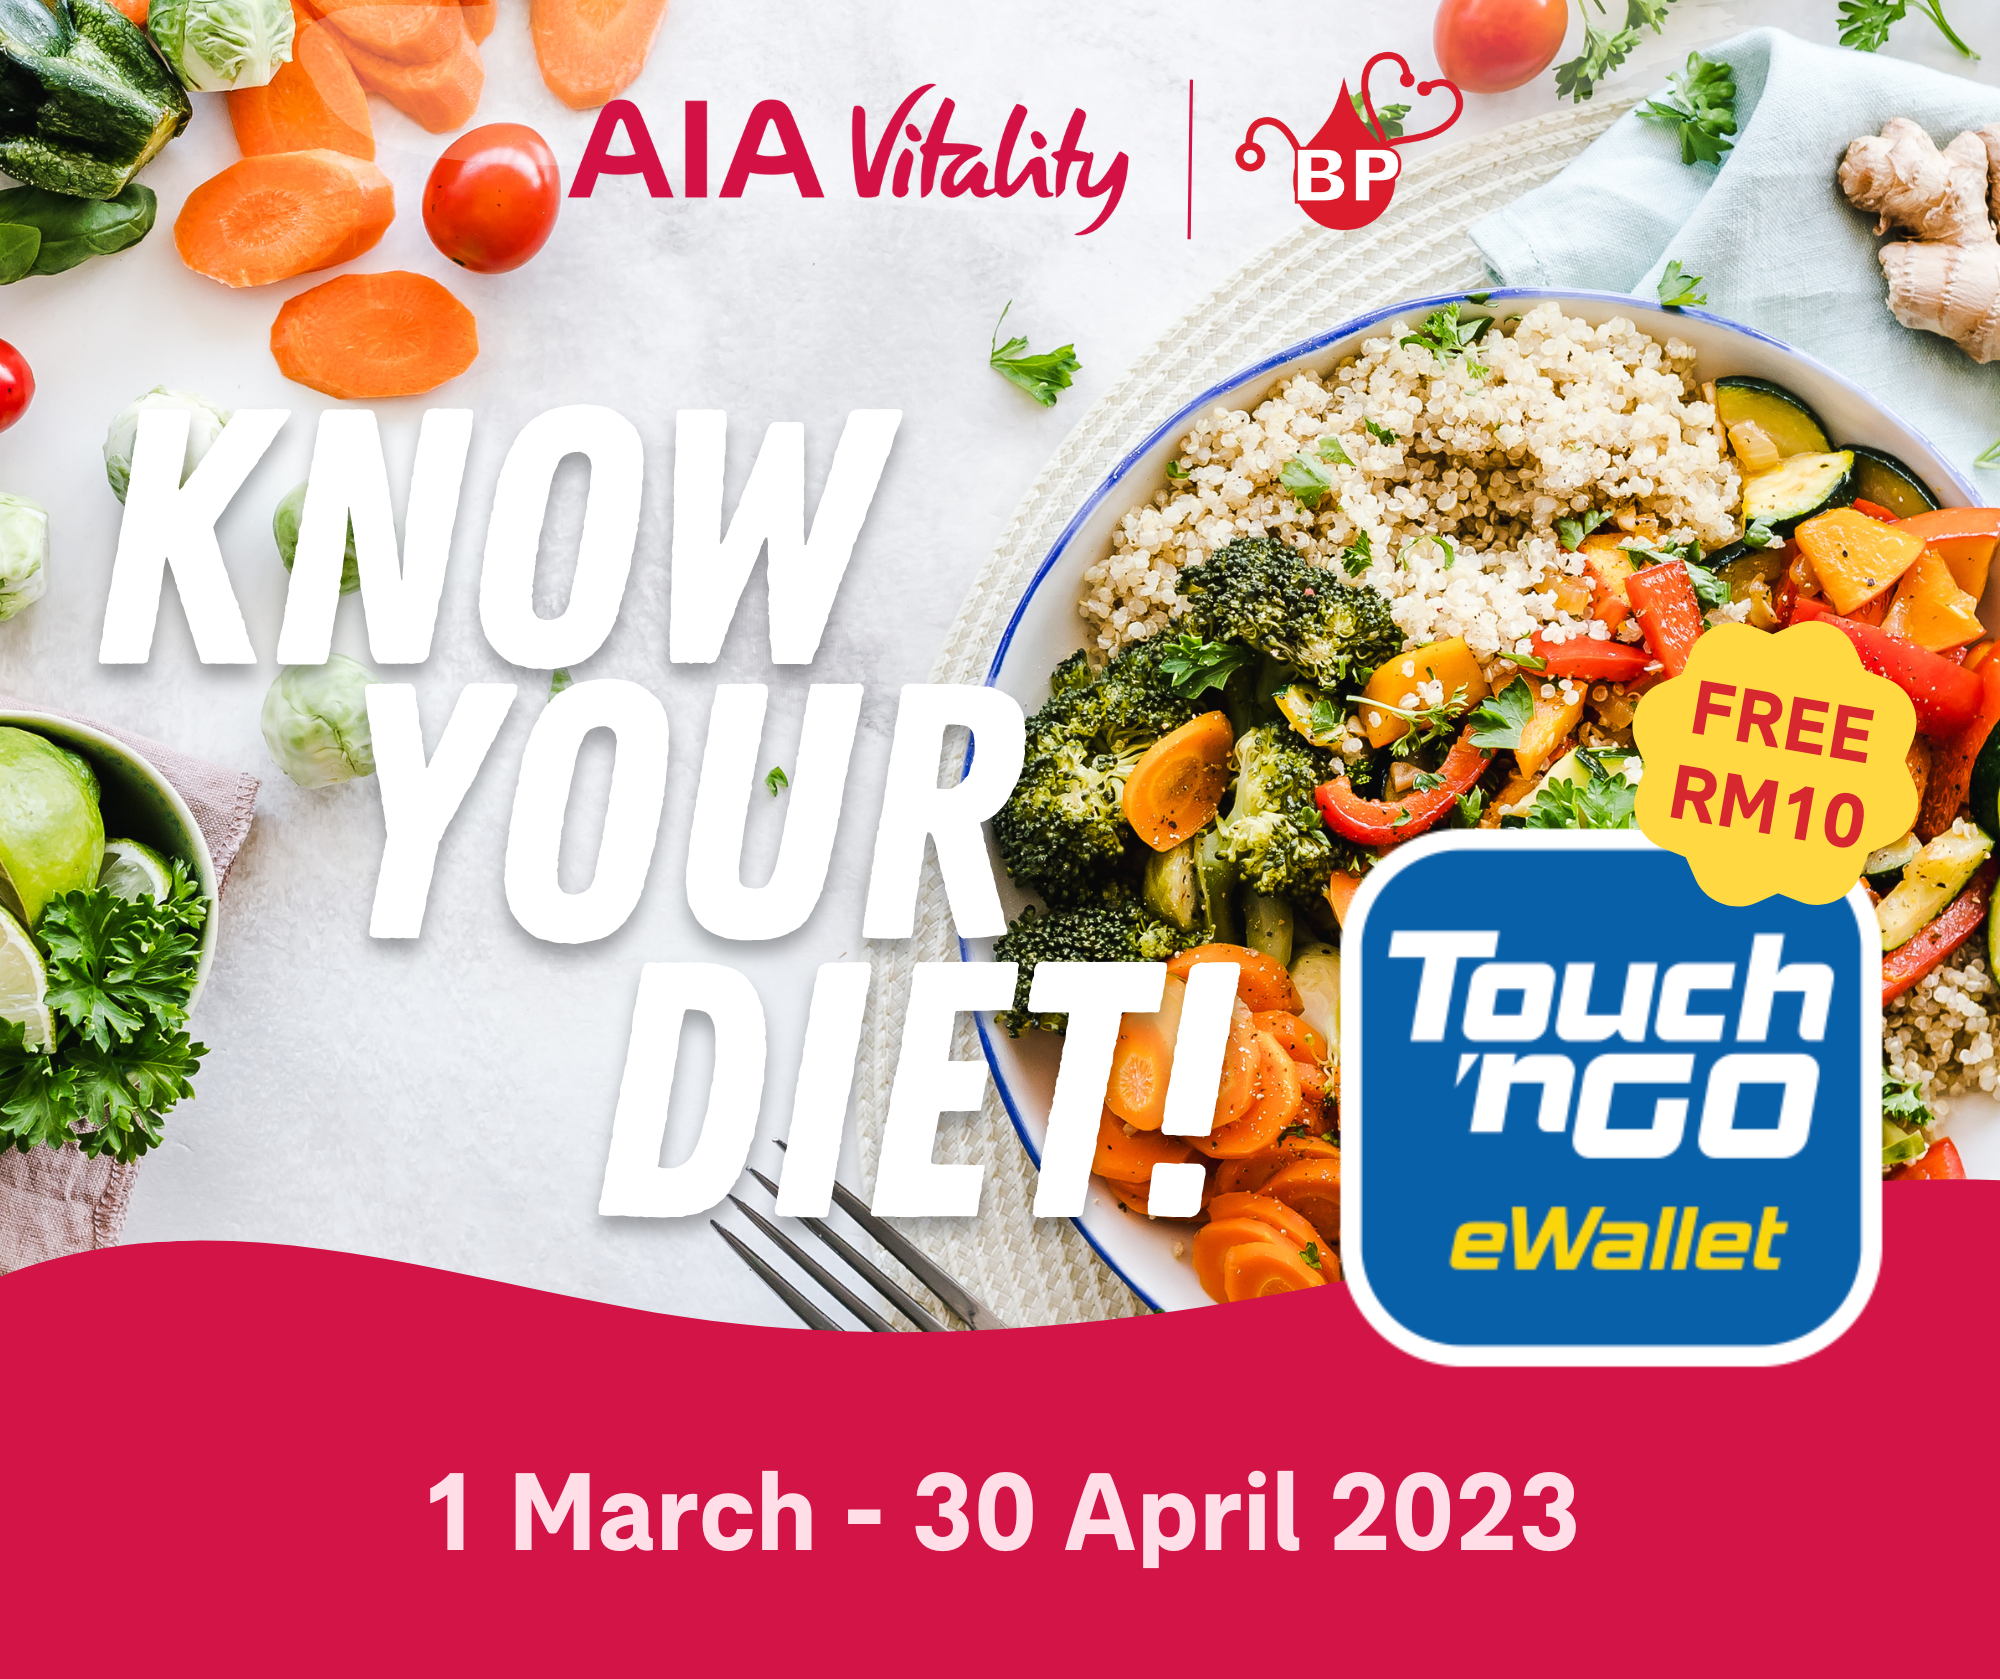 KNOW YOUR DIET AND GET RM10 ON US